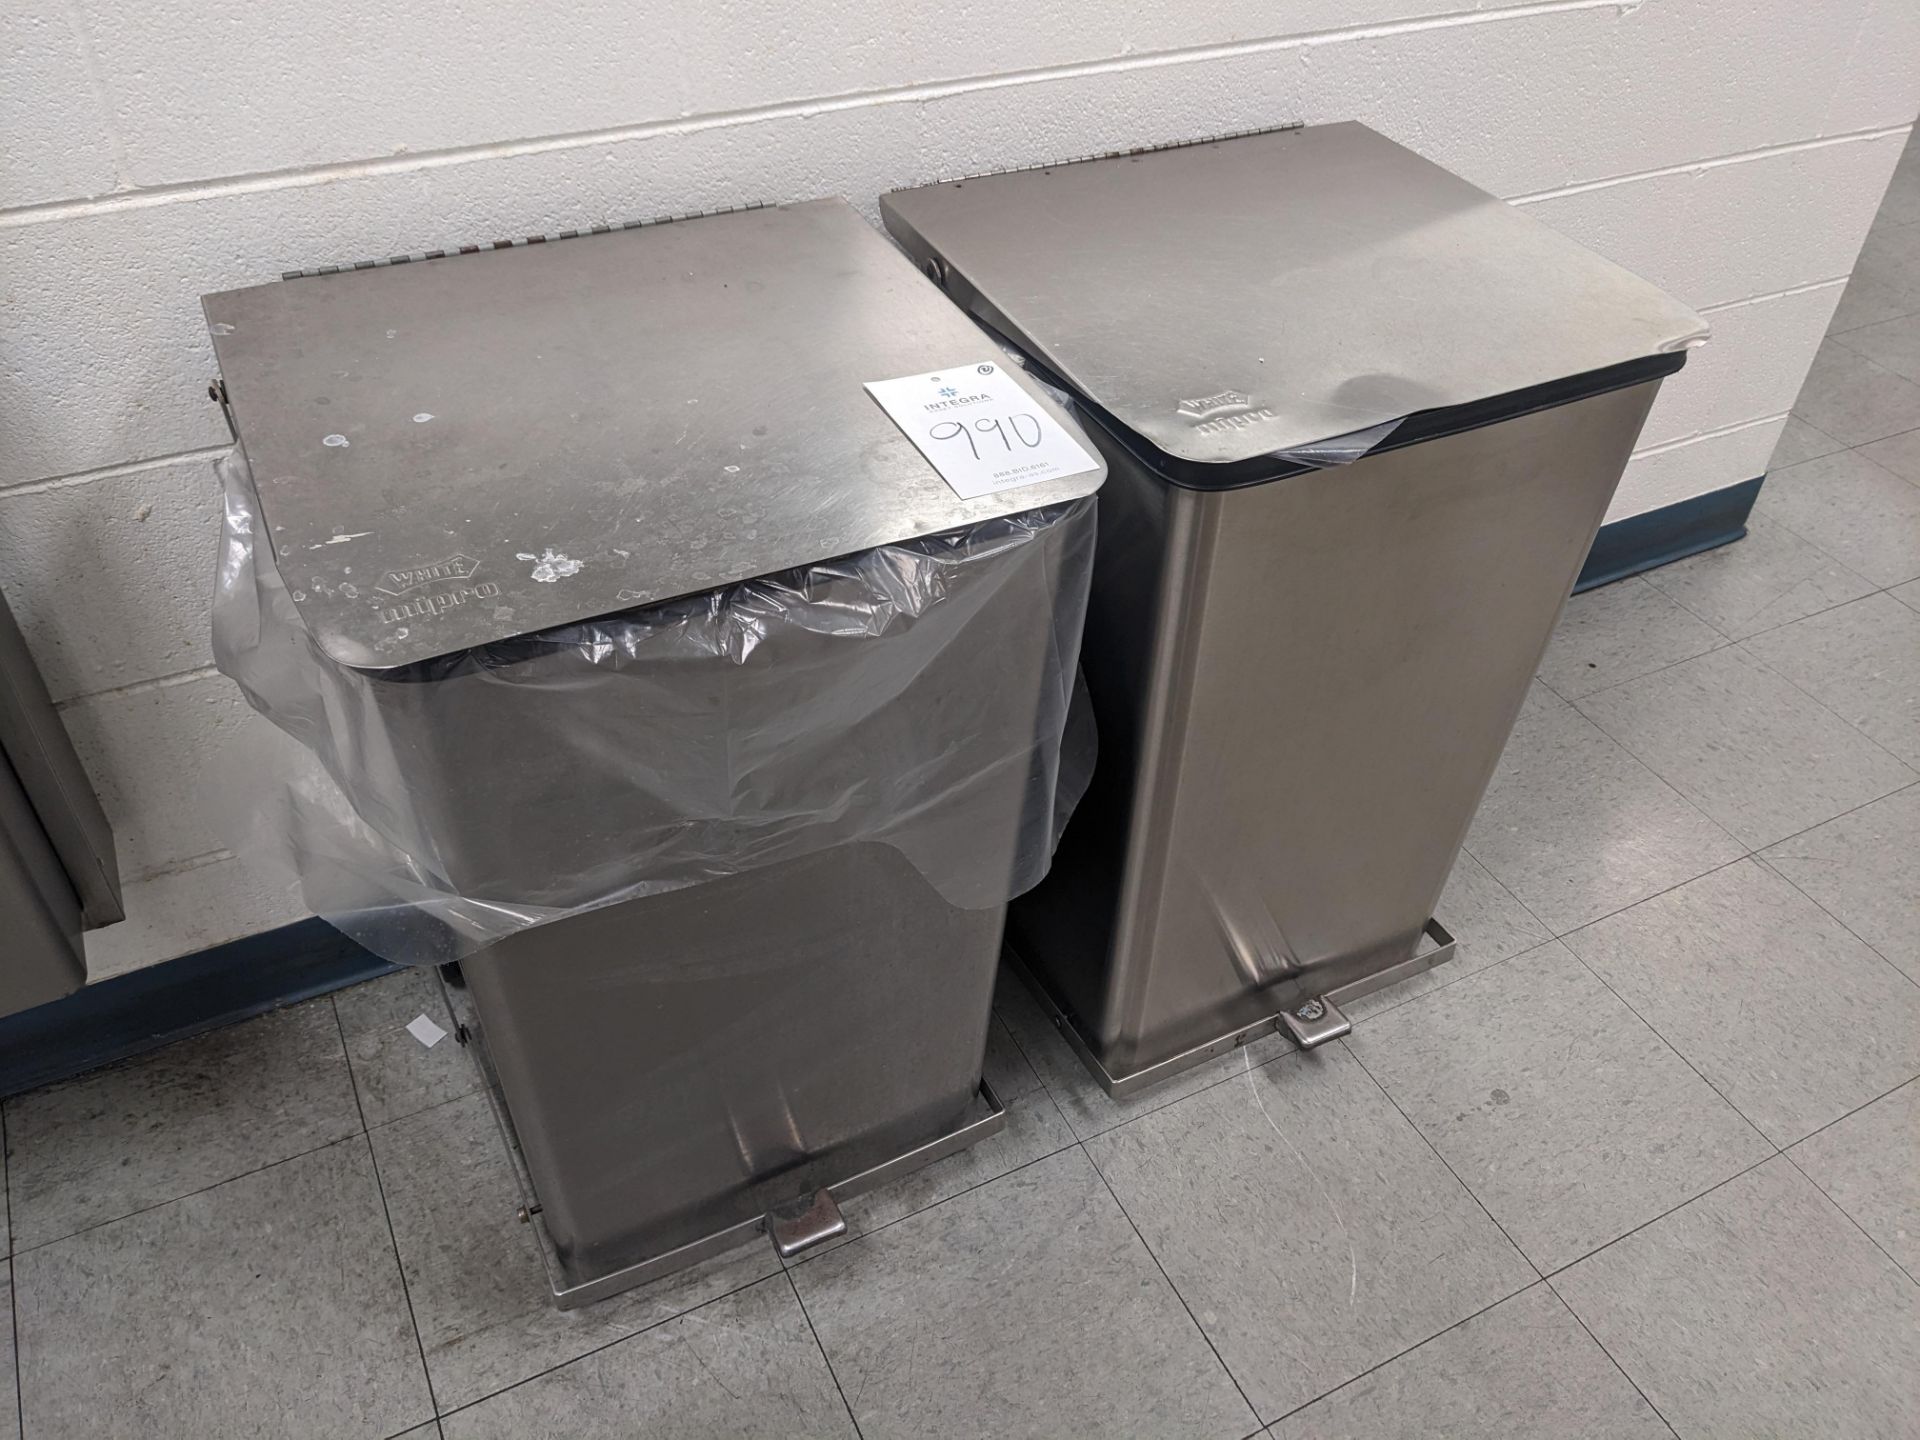 Lot of (2) White Mi-Pro Stainless Steel Foot Pedal Trash Bins